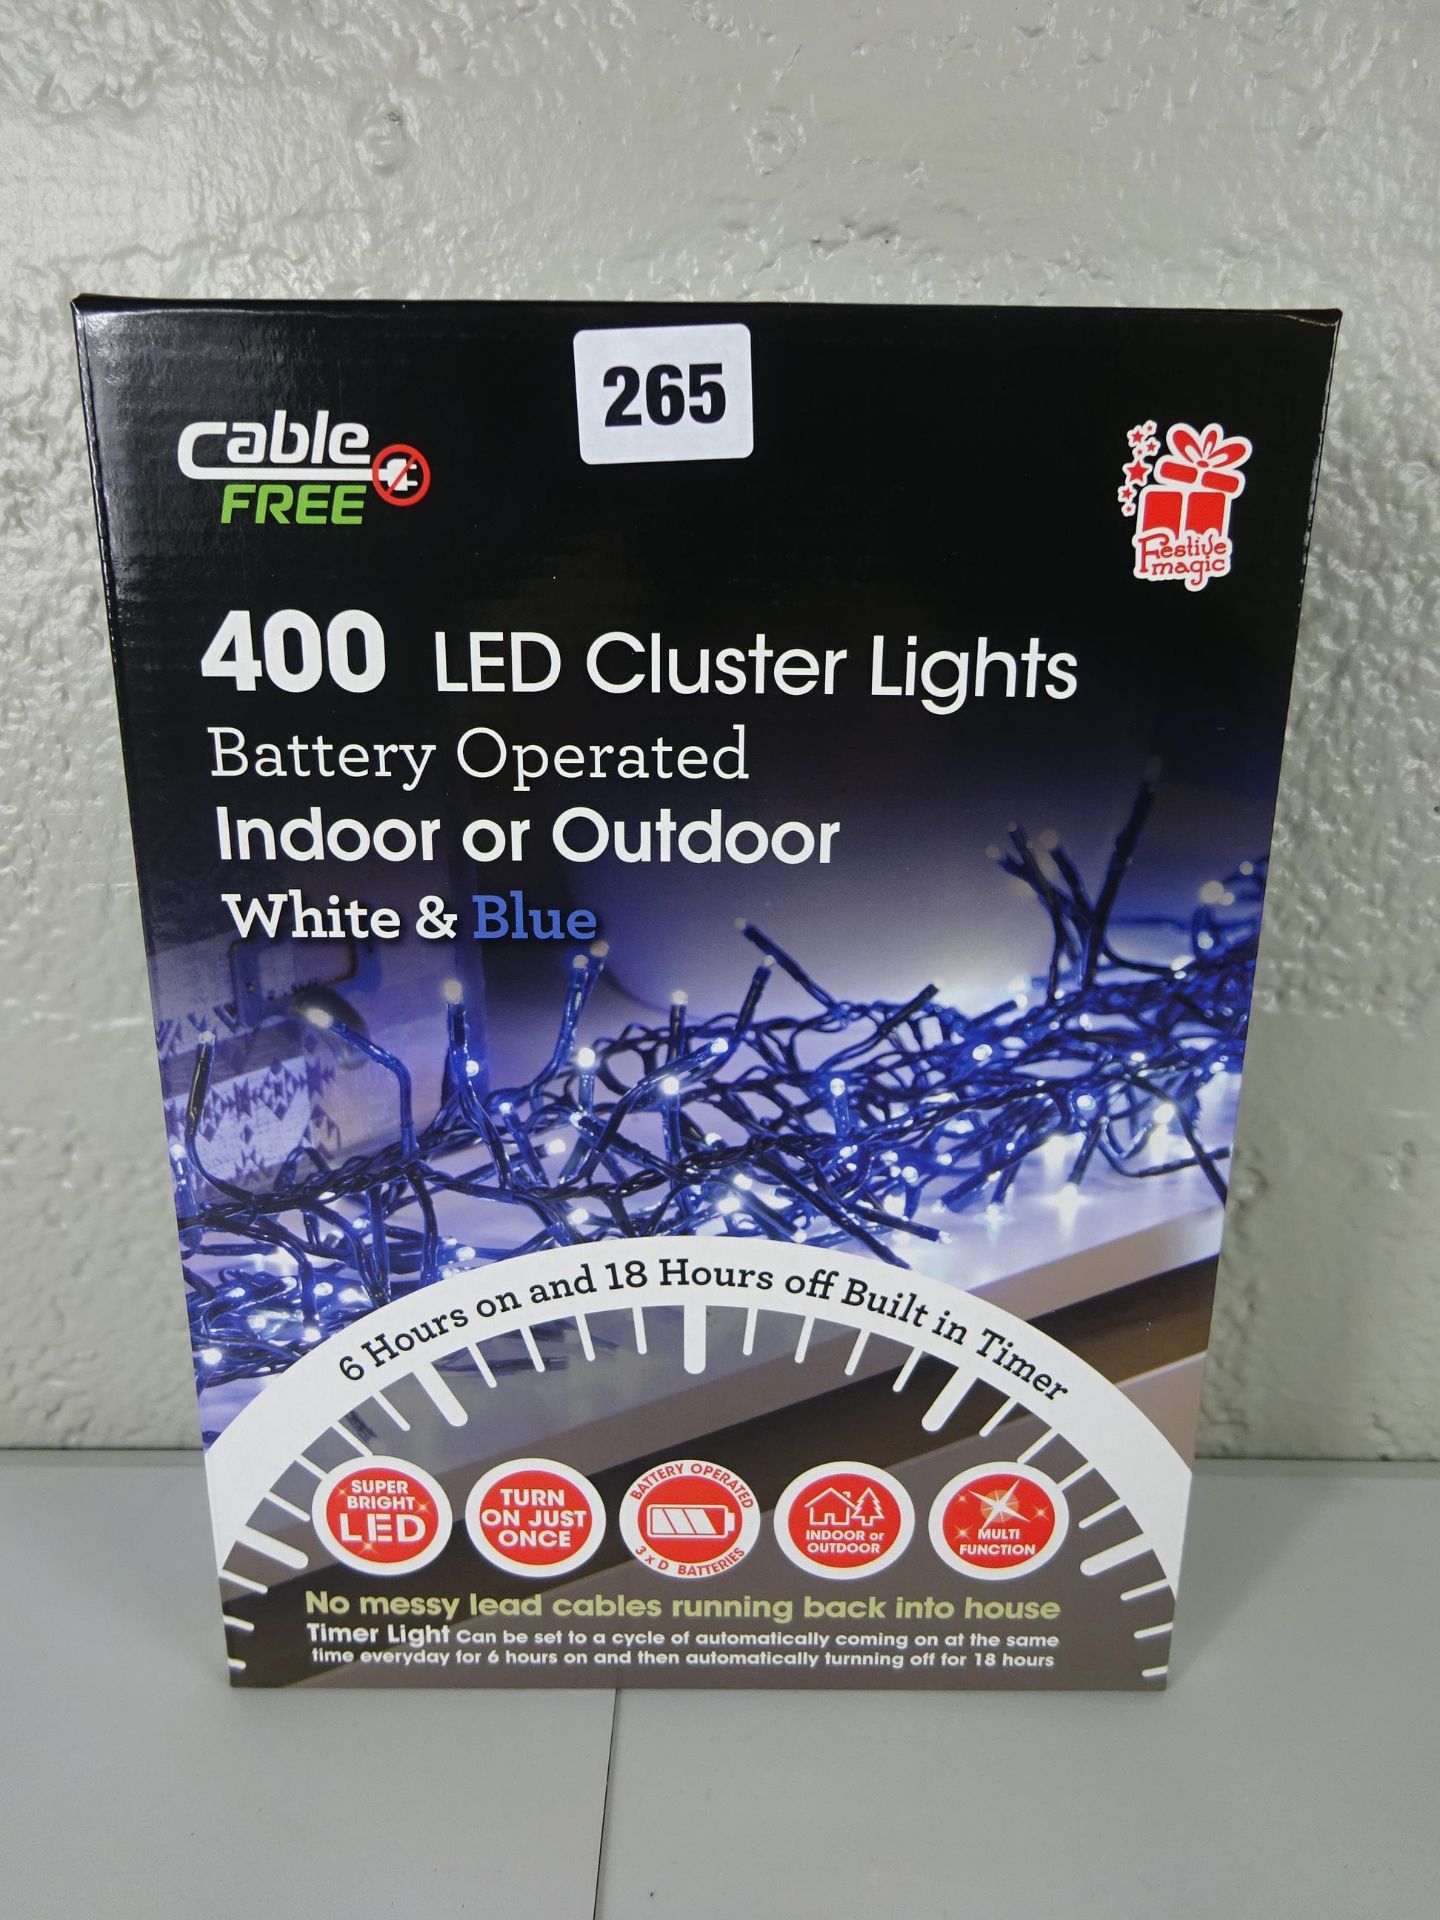 CABLE FREE LED CLUSTER LIGHTS WHITE & BLUE